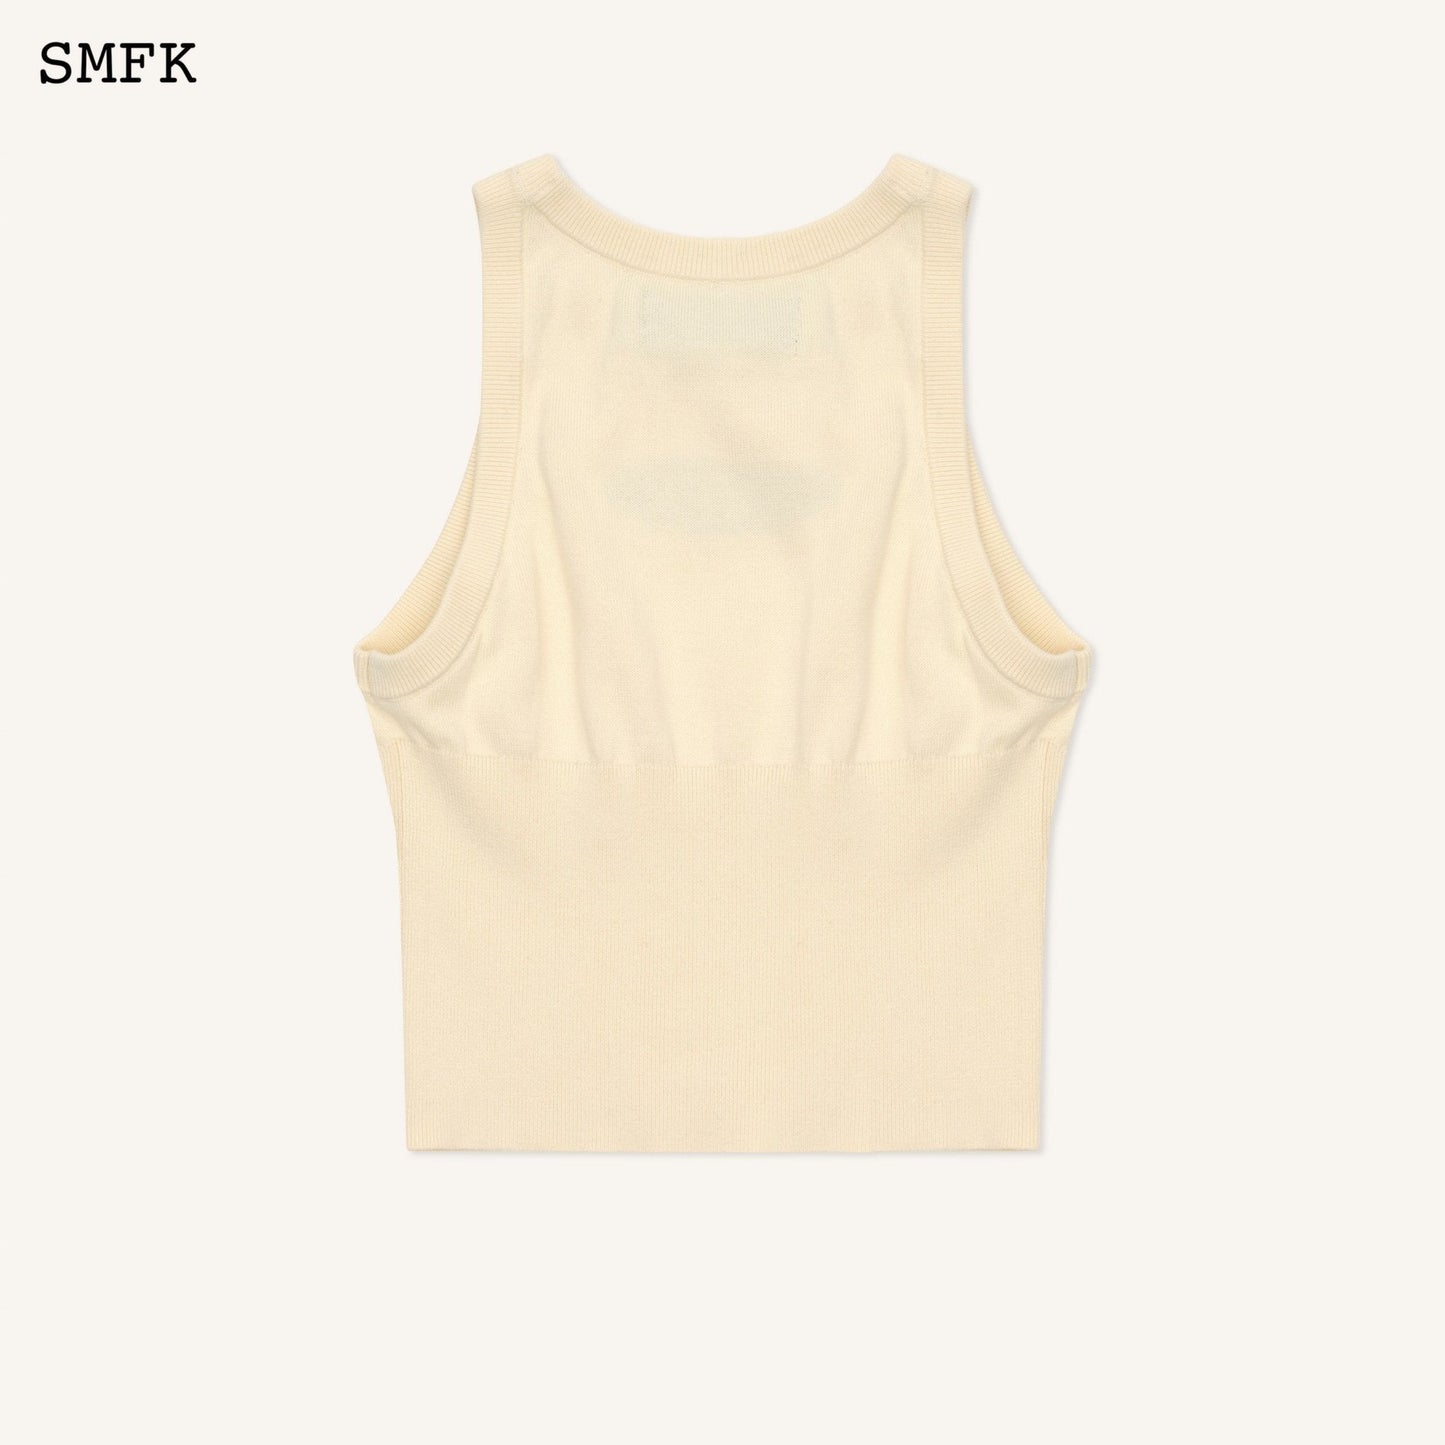 SMFK Compass Cream Vintage Vacation Knitted Vest